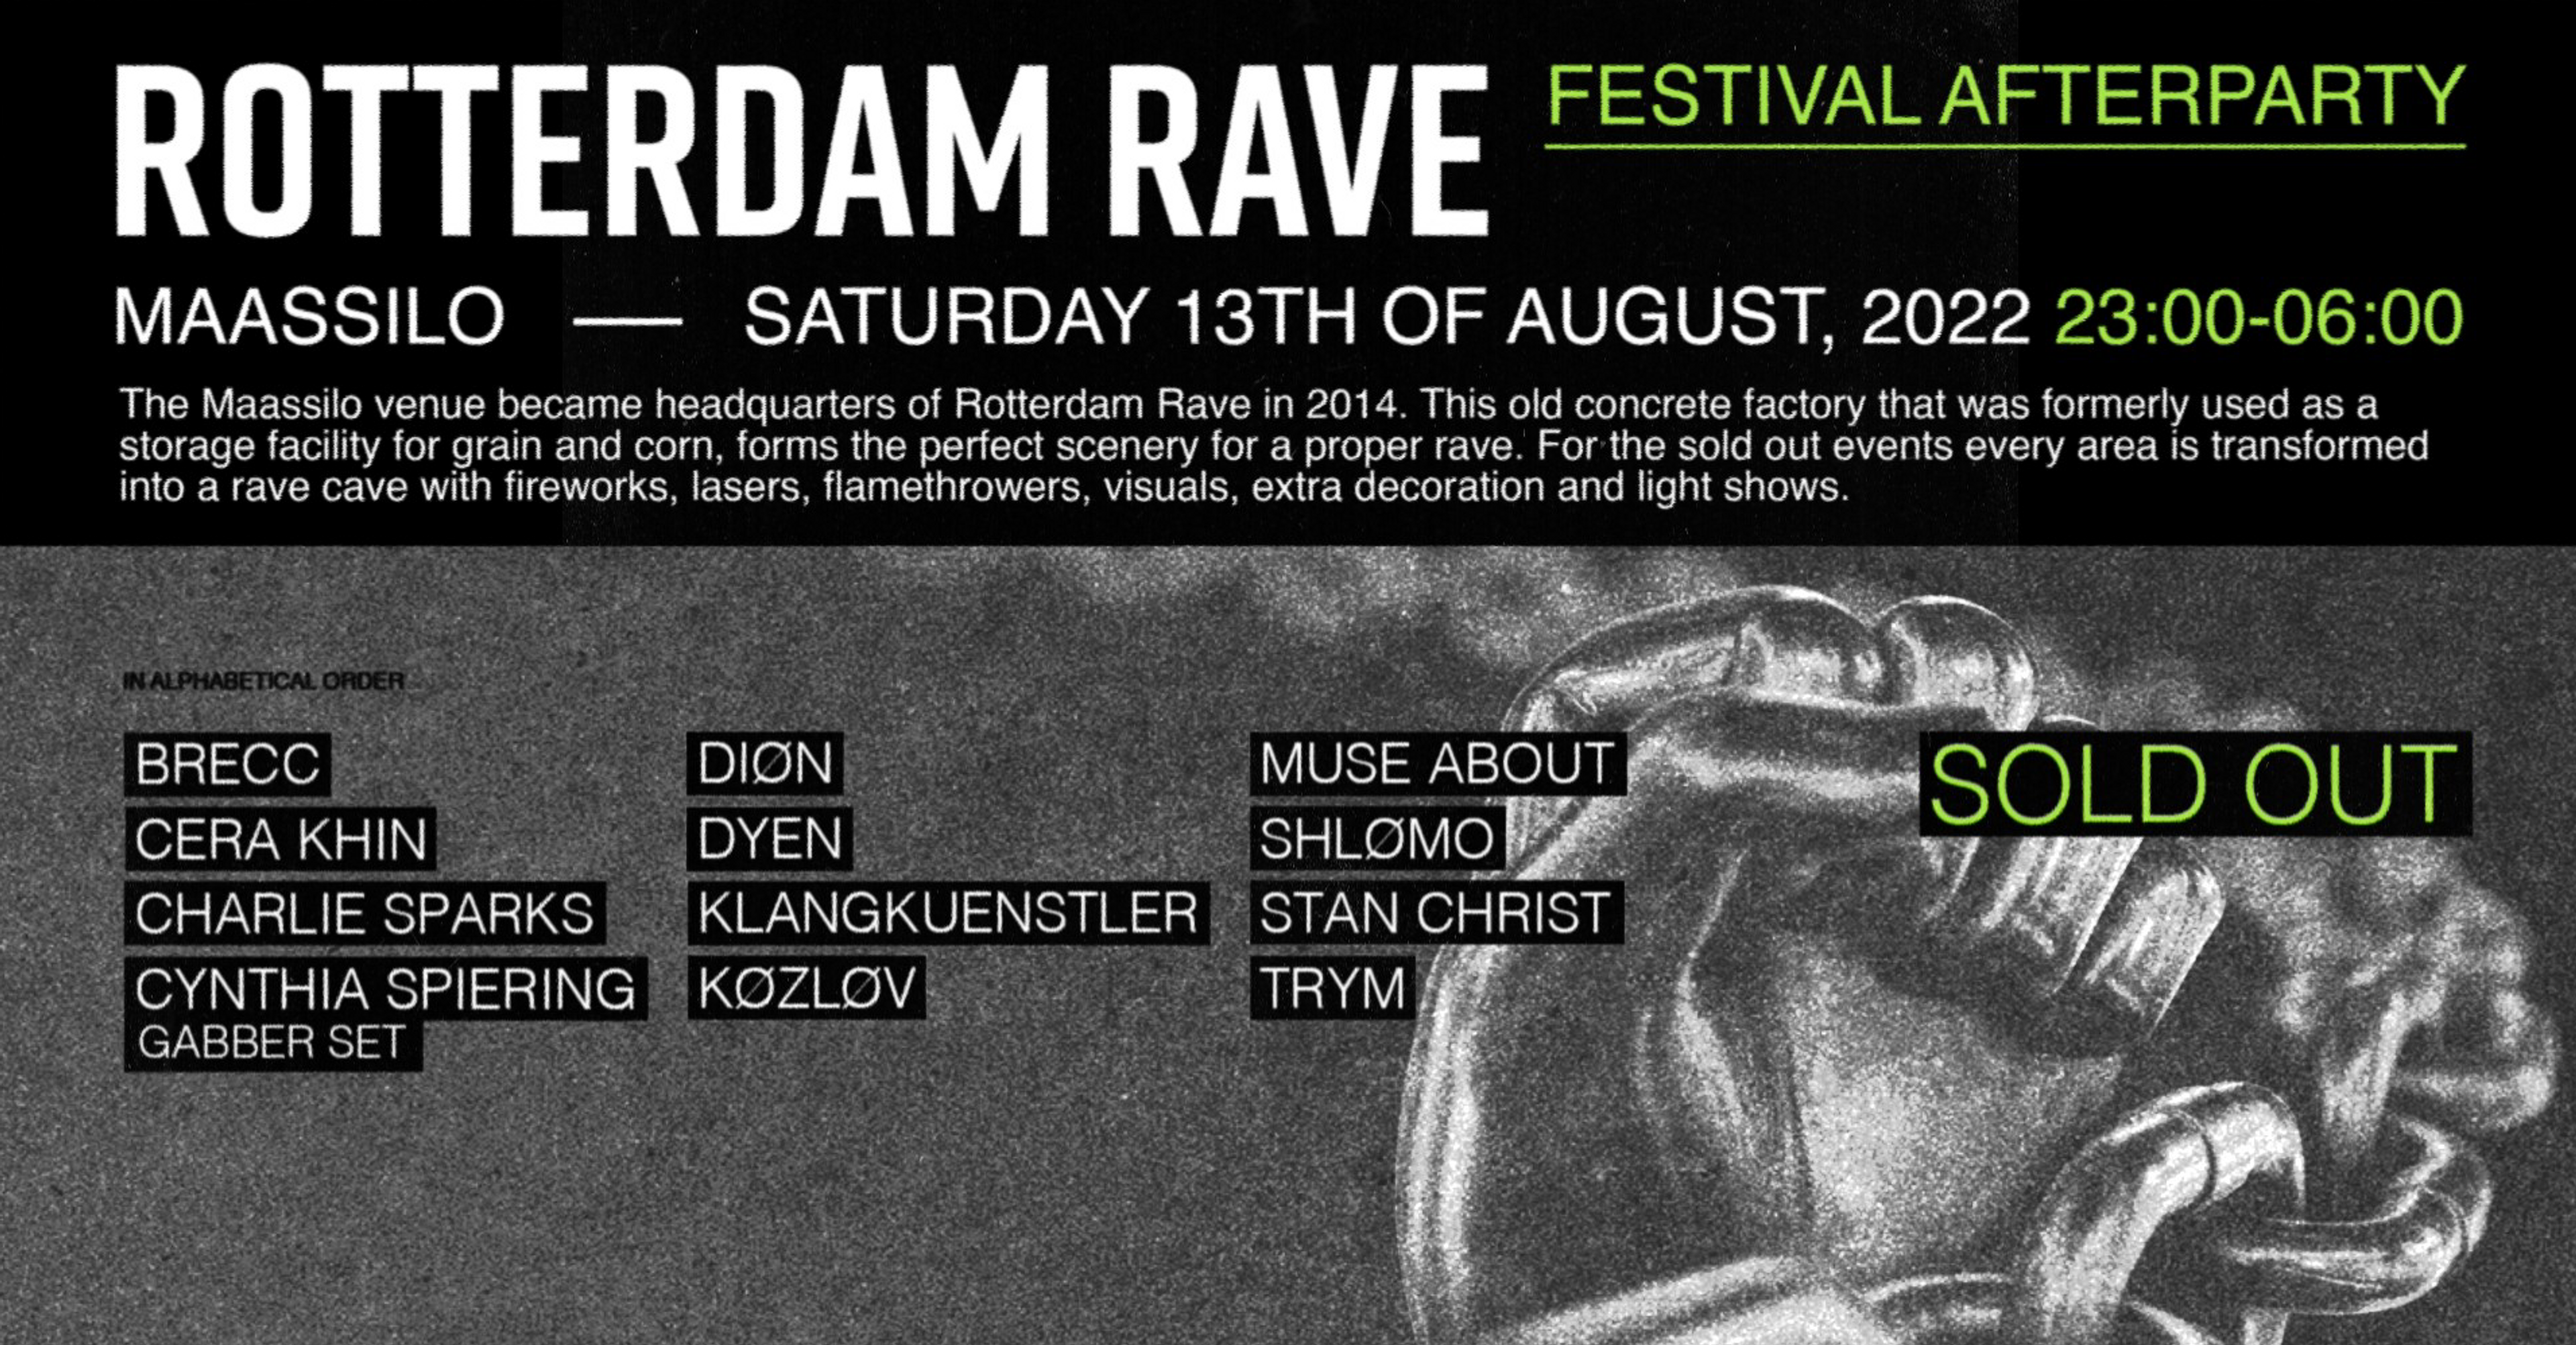 Rotterdam Rave Festival 2022 Afterparty